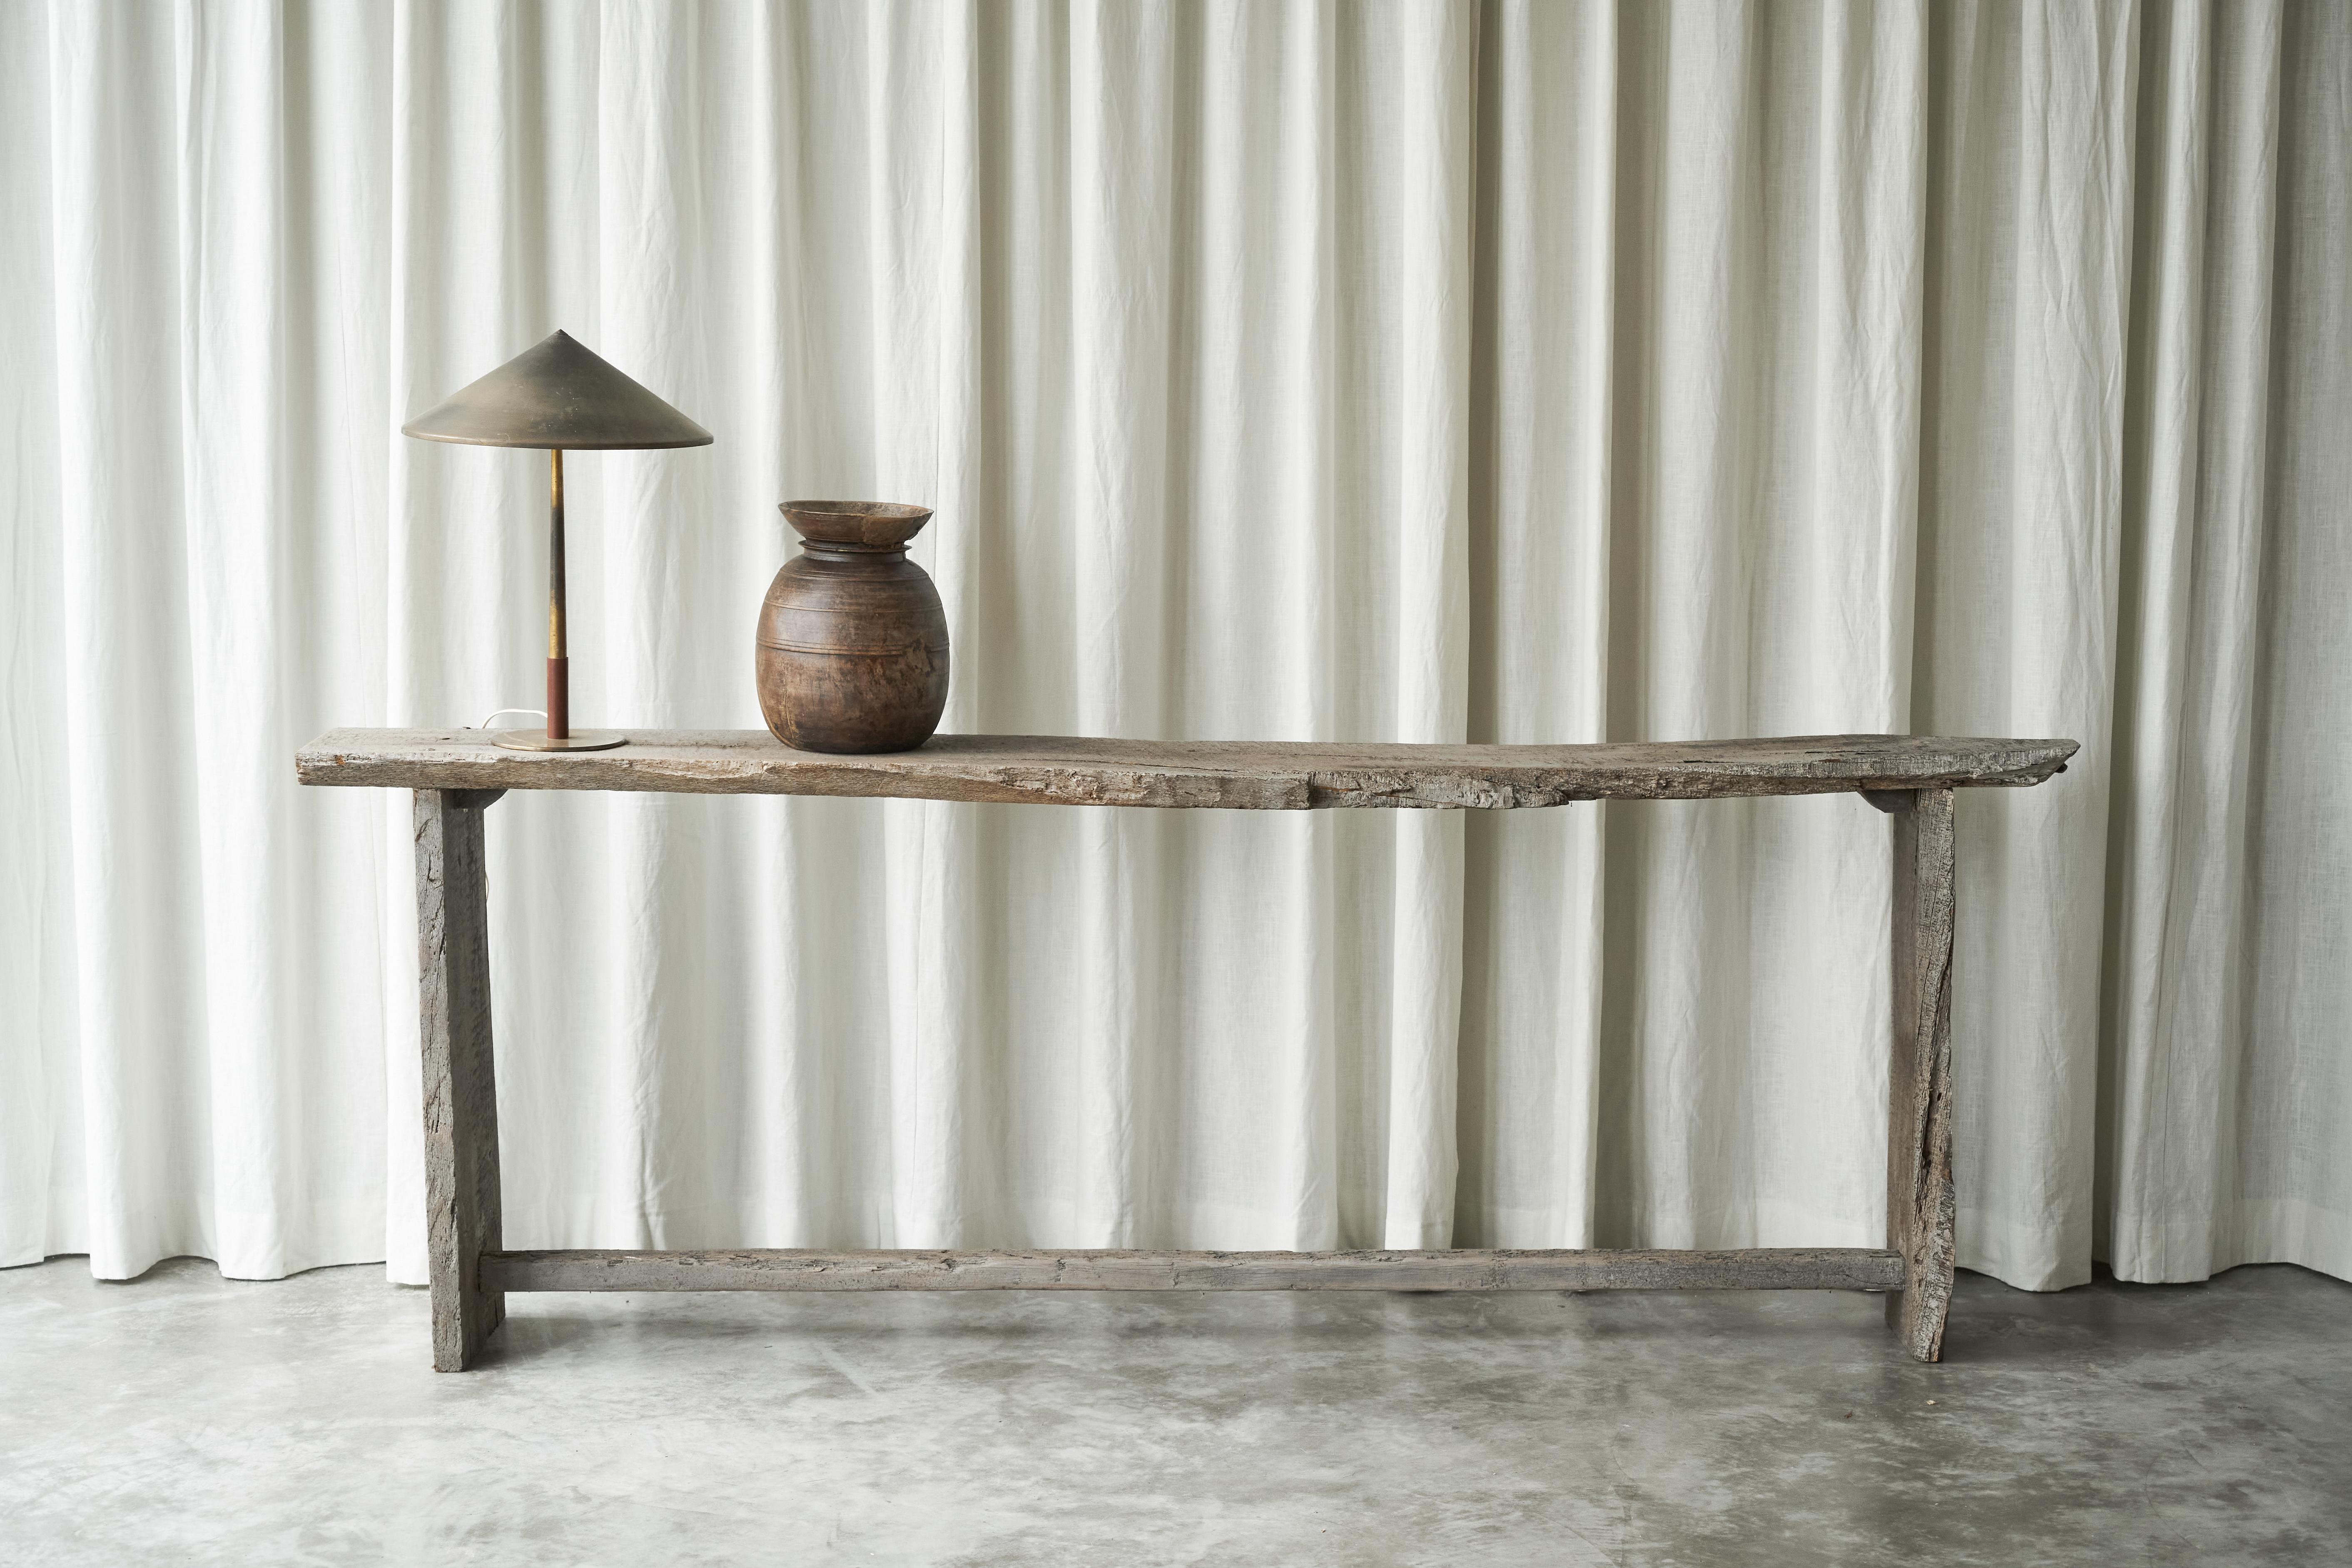 Large Antique Wabi Sabi Console Table, 19th Century.

This antique console table is a true gem coming from a centuries old German farmhouse. Probably dating to the early 19th century - it could even be older - this console table is a true wabi sabi